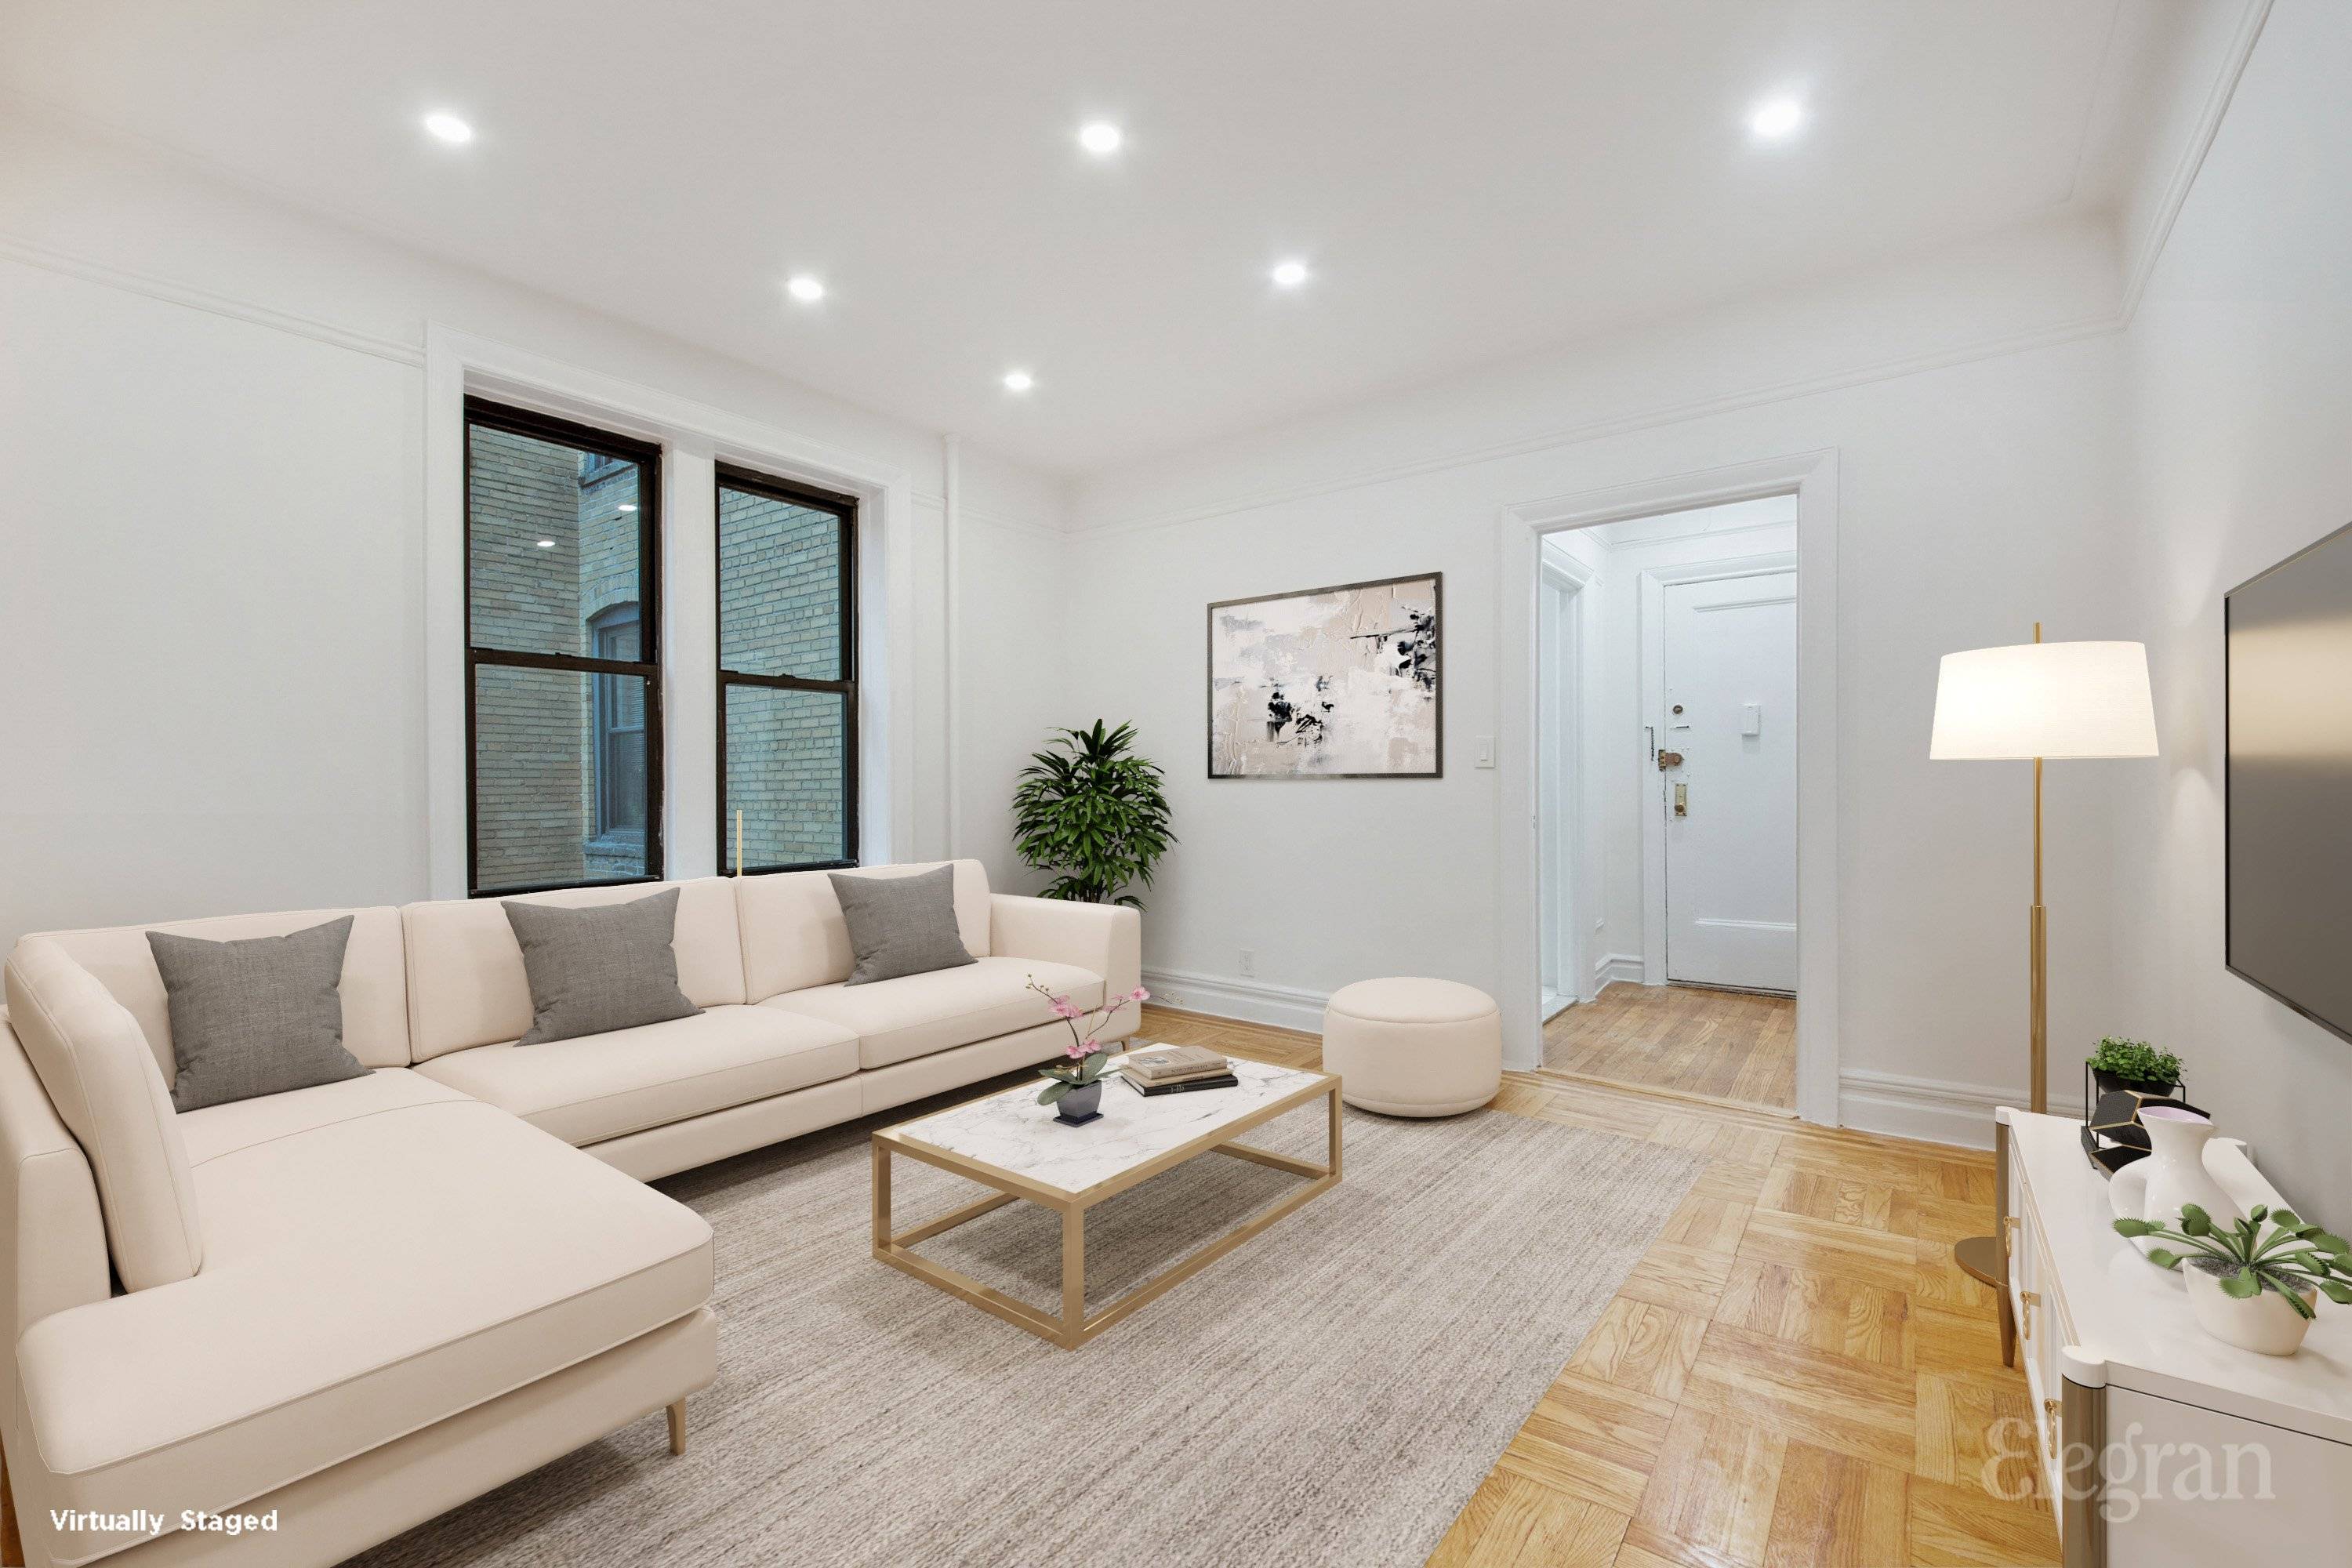 Discover this spacious 1 bedroom apartment nestled in the heart of Yorkville, boasting recent renovations, recessed lighting and hardwood floors throughout.